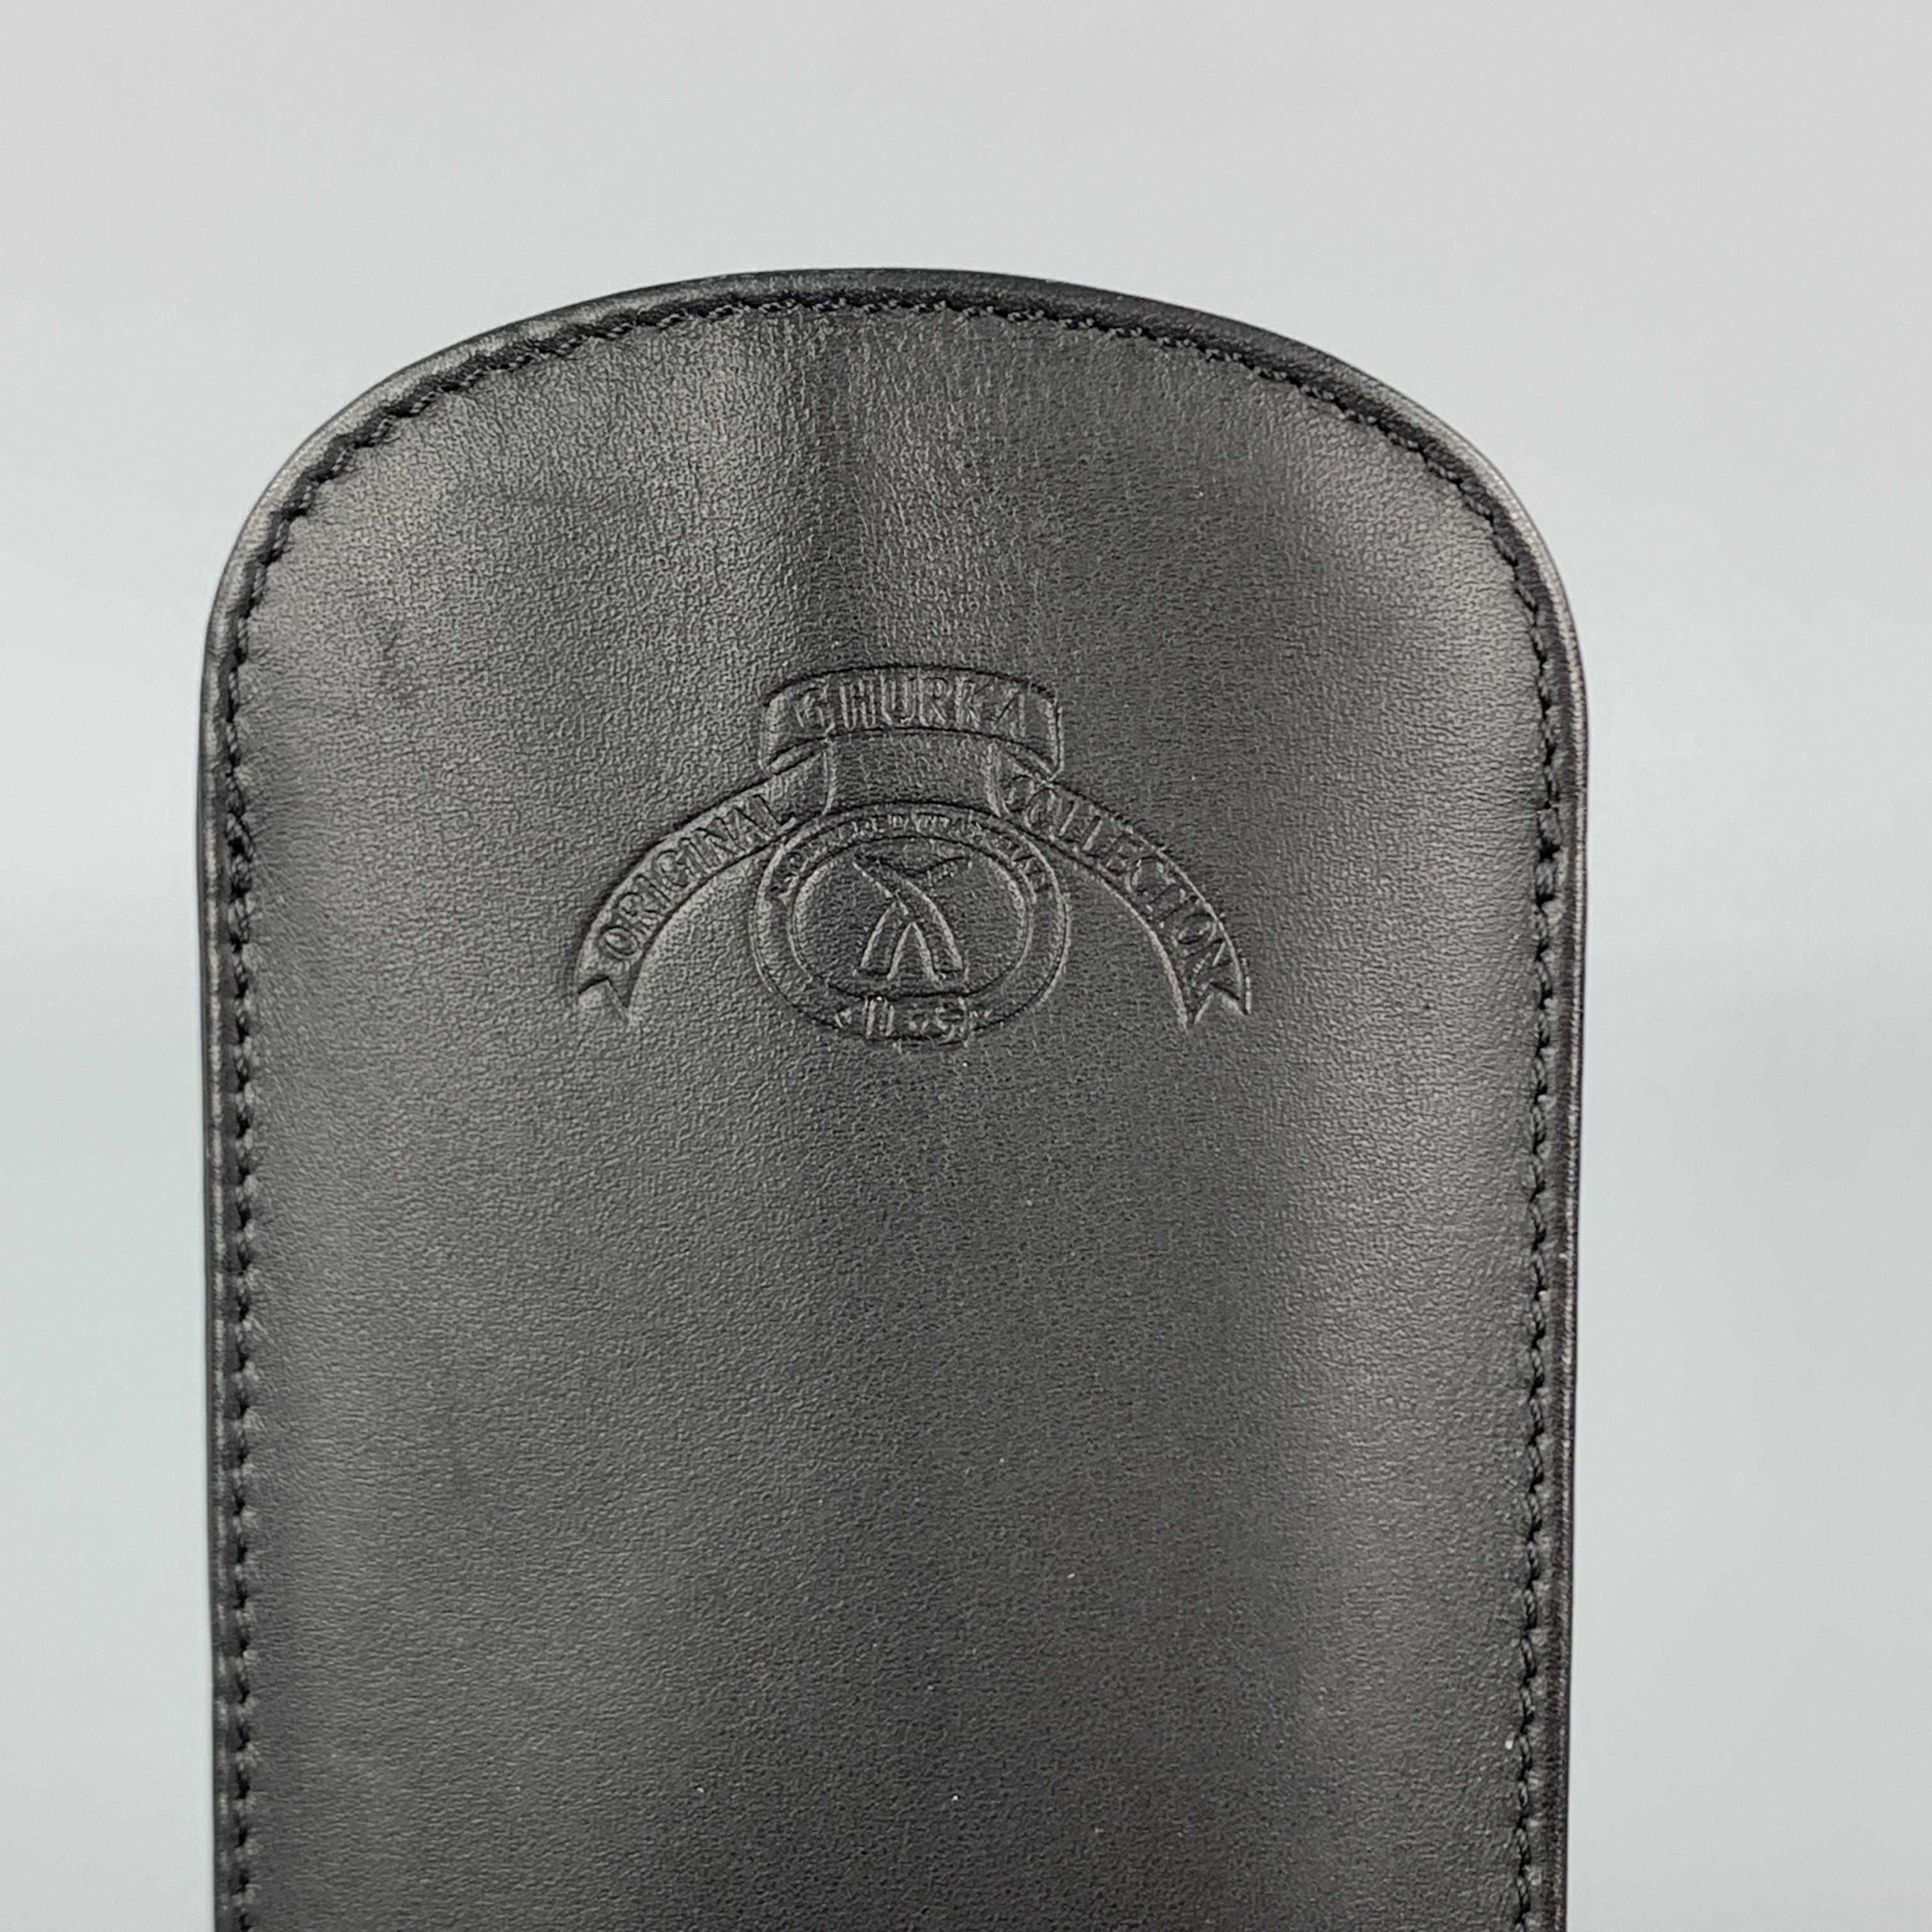 GHURKA sunglasses case comes in black leather with a stamped logo. 

Very Good Pre-Owned Condition.

Size: 6.5 x 3.1 in.